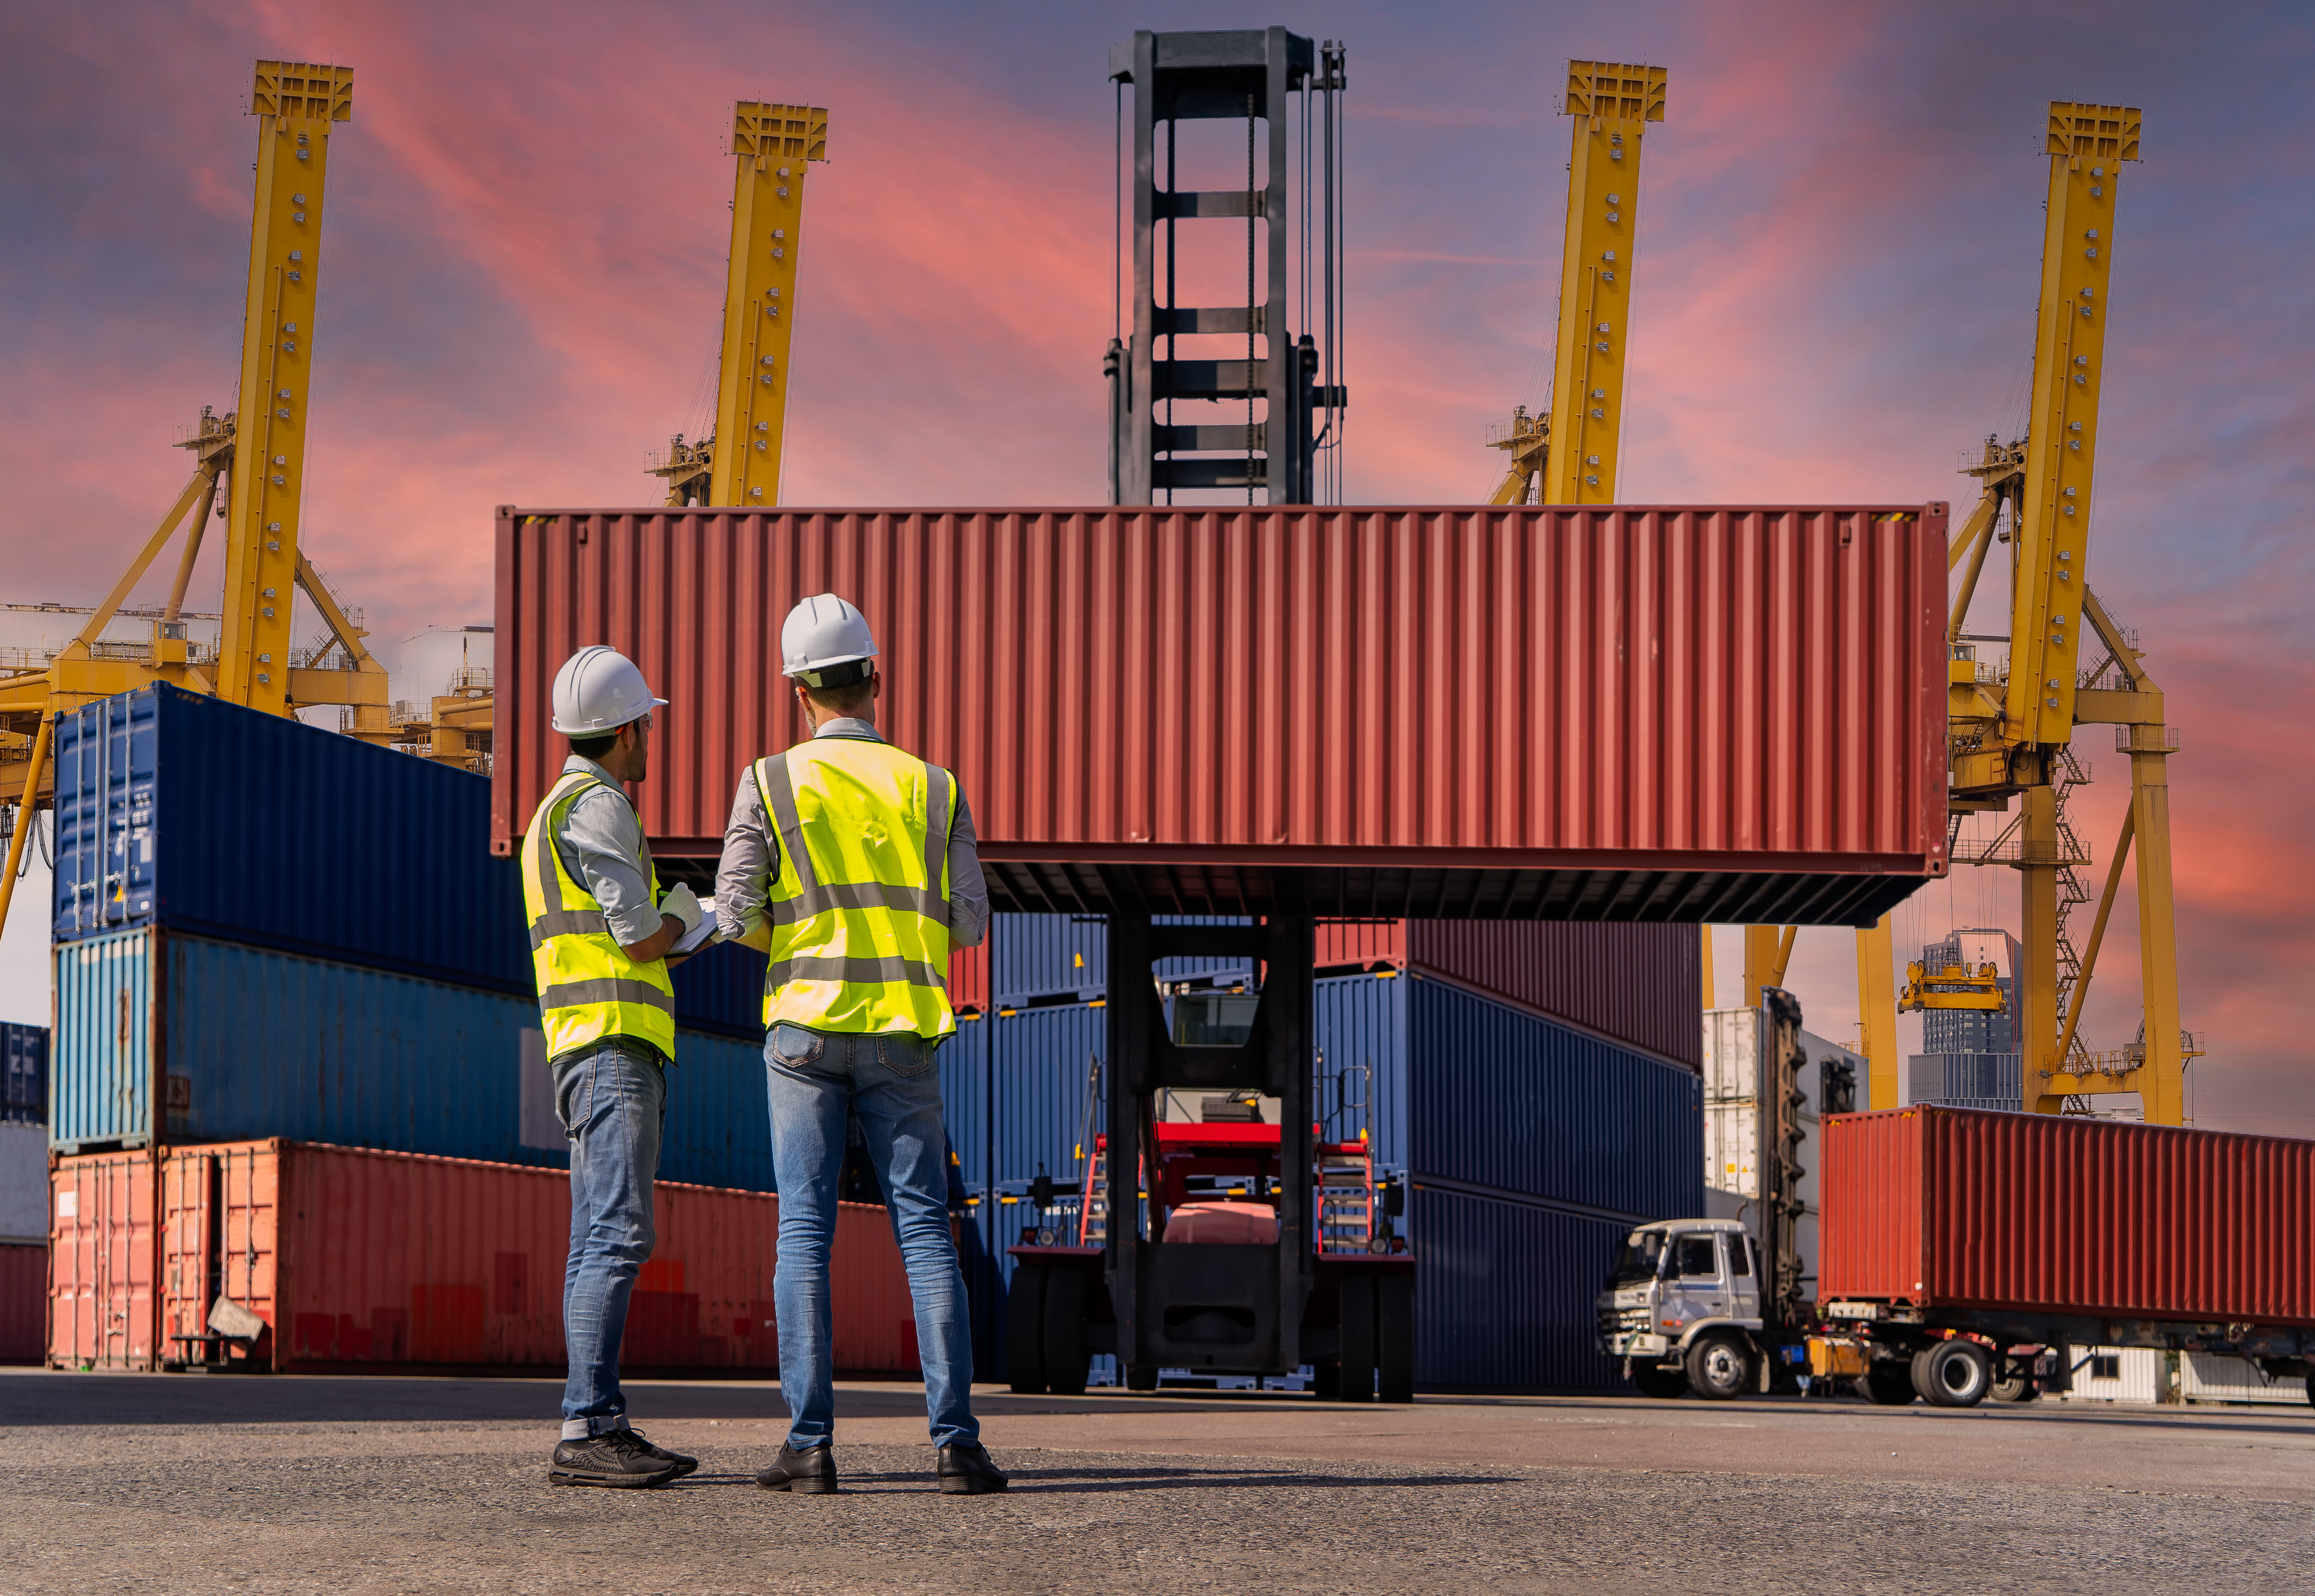 Why do we need the Incoterms Rules?